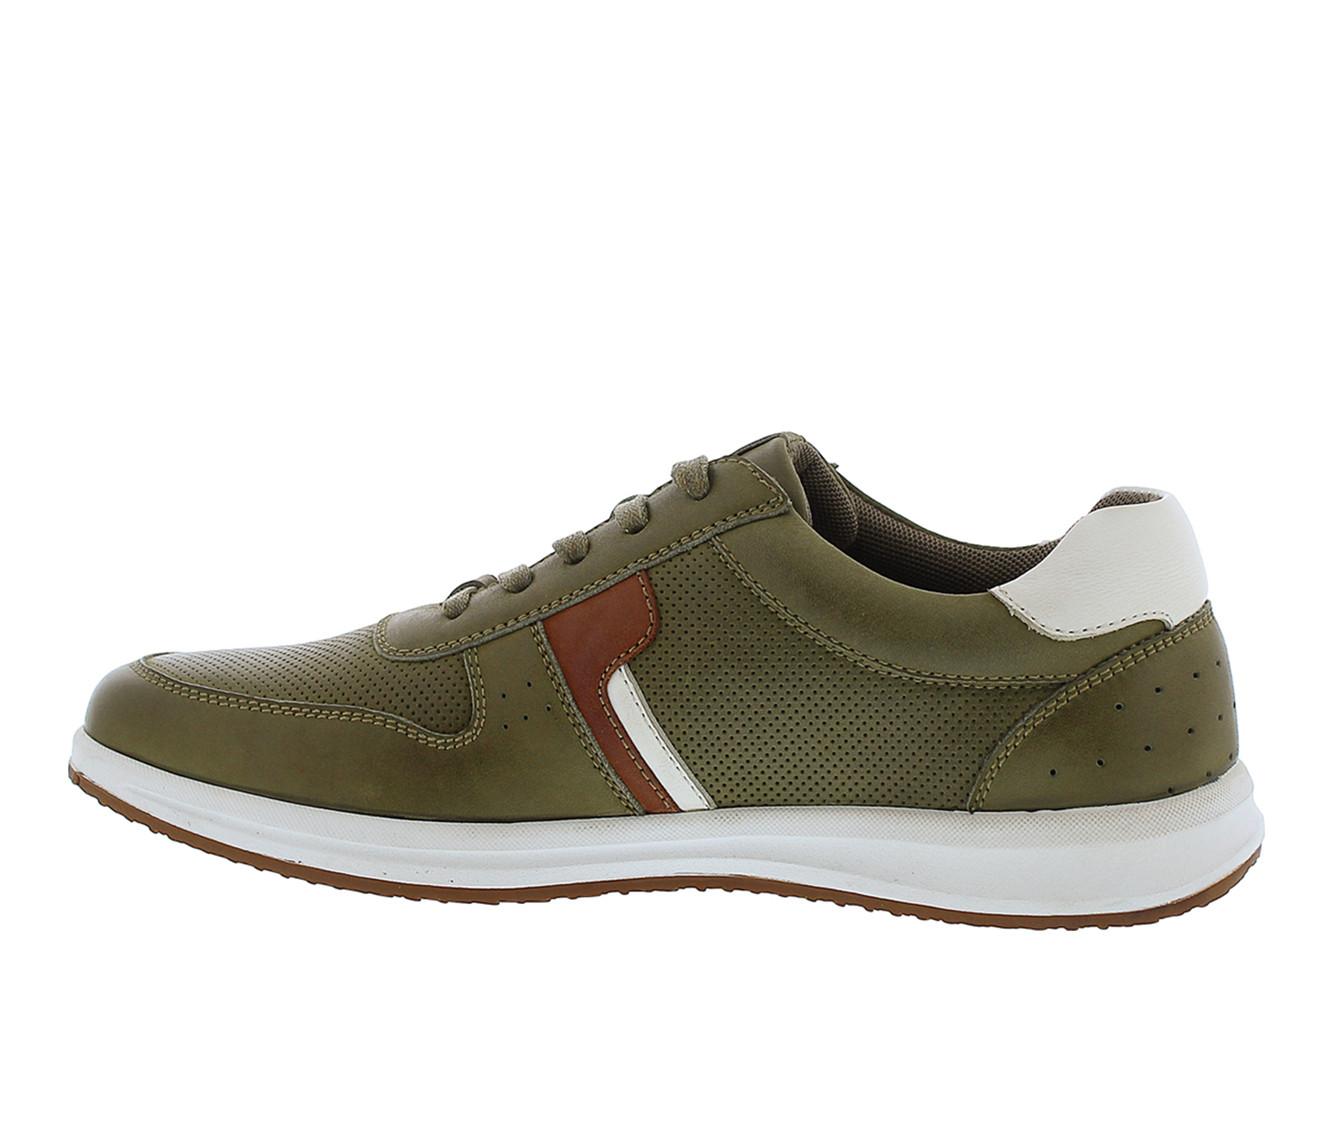 Men's English Laundry Brady Casual Oxford Sneakers